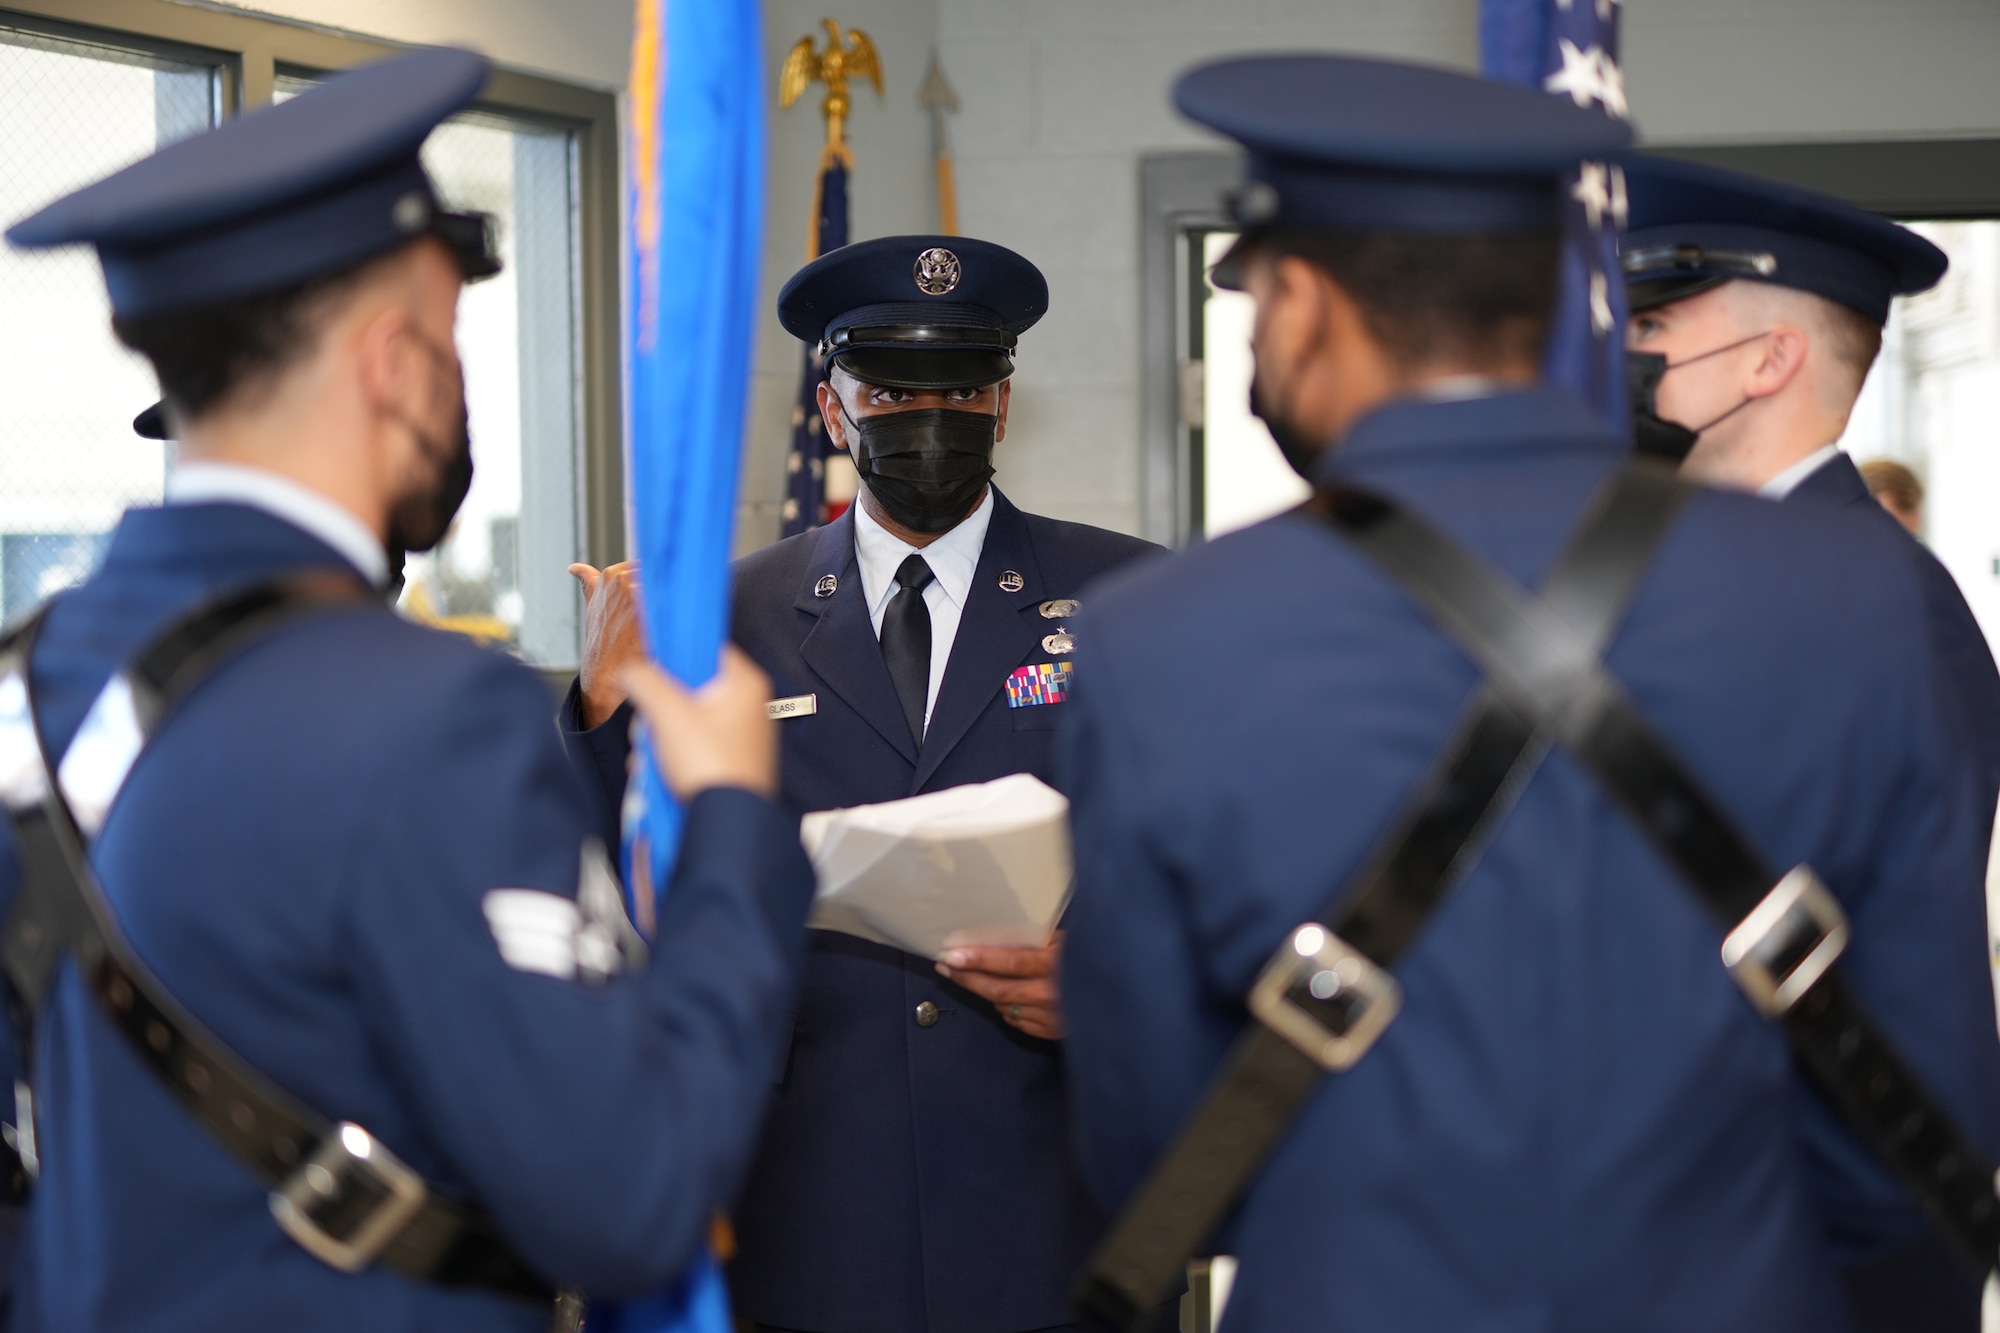 Master Sgt. Michael Glass, 459th Air Refueling Wing Honor Guard NCOIC, briefs detail prior to the presentation of colors, June 6, 2021, at Joint Base Andrew, Md. Glass took charge of the program in 2019 and is looking to recruit new Airmen. (U.S. Air Force photo by Tech Sgt. Brent Skeen)